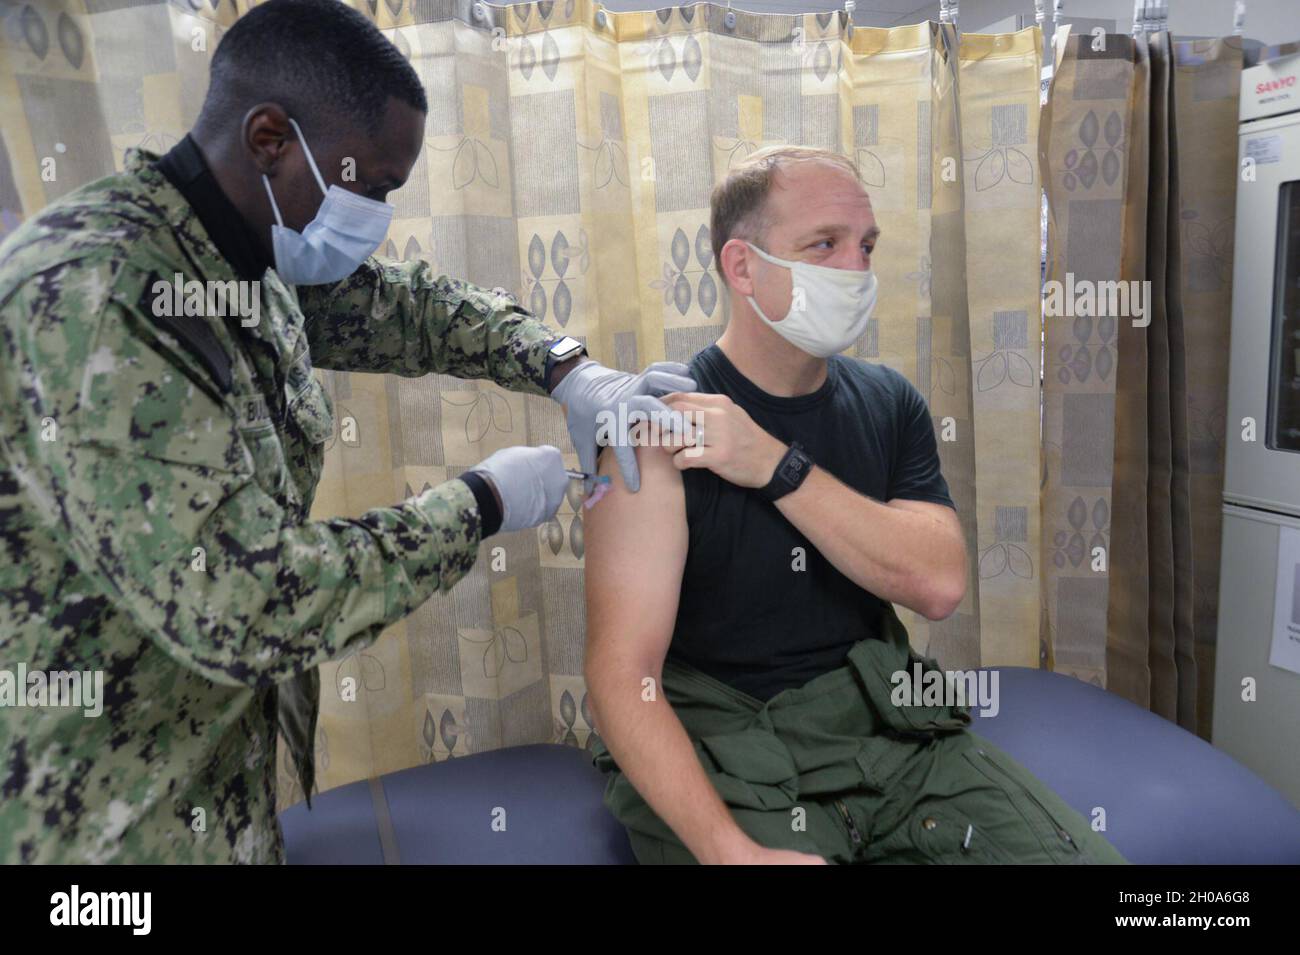 210105-N-DH793-1002 PORTSMOUTH, Va. (Jan. 5, 2021) Capt. Daniel Prochazka, from Woodbridge, Virginia, executive officer of the Nimitz-class aircraft carrier USS Harry S. Truman (CVN 75), receives a COVID-19 vaccination at Naval Medical Center Portsmouth. Truman is currently in Norfolk Naval Shipyard for its Extended Carrier Incremental Availability (ECIA) period. Stock Photo